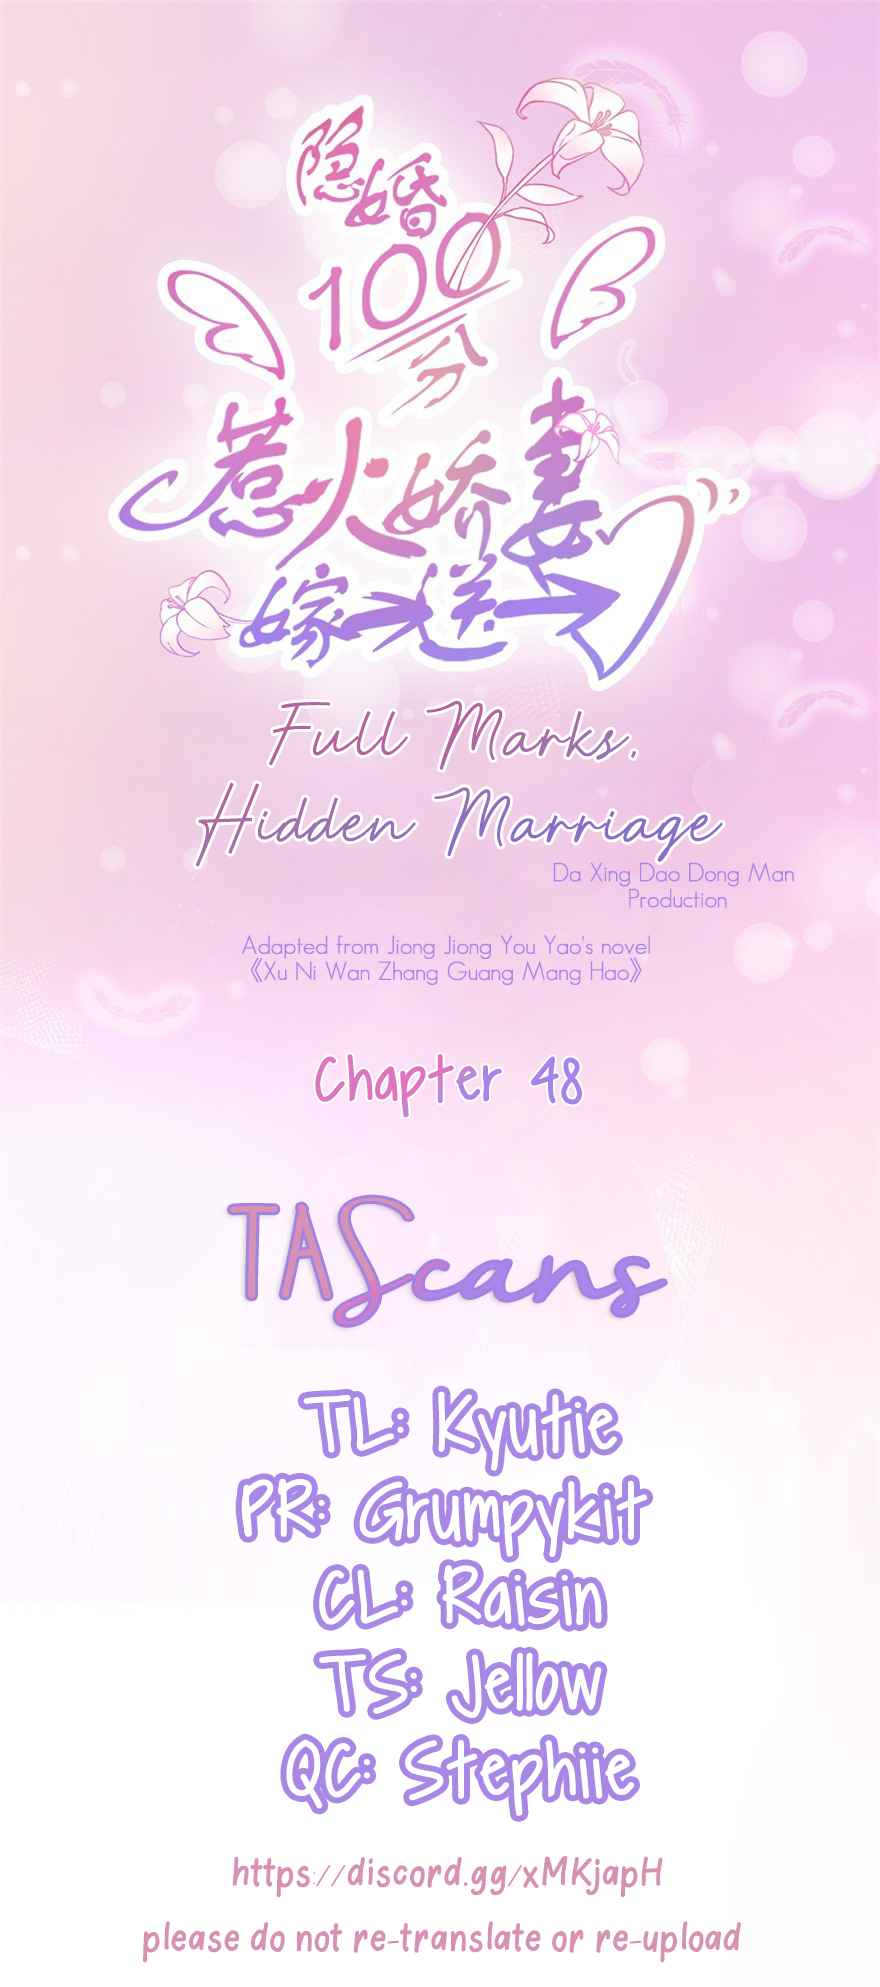 Full Marks, Hidden Marriage Ch. 48 Ning Xi, stay alright?